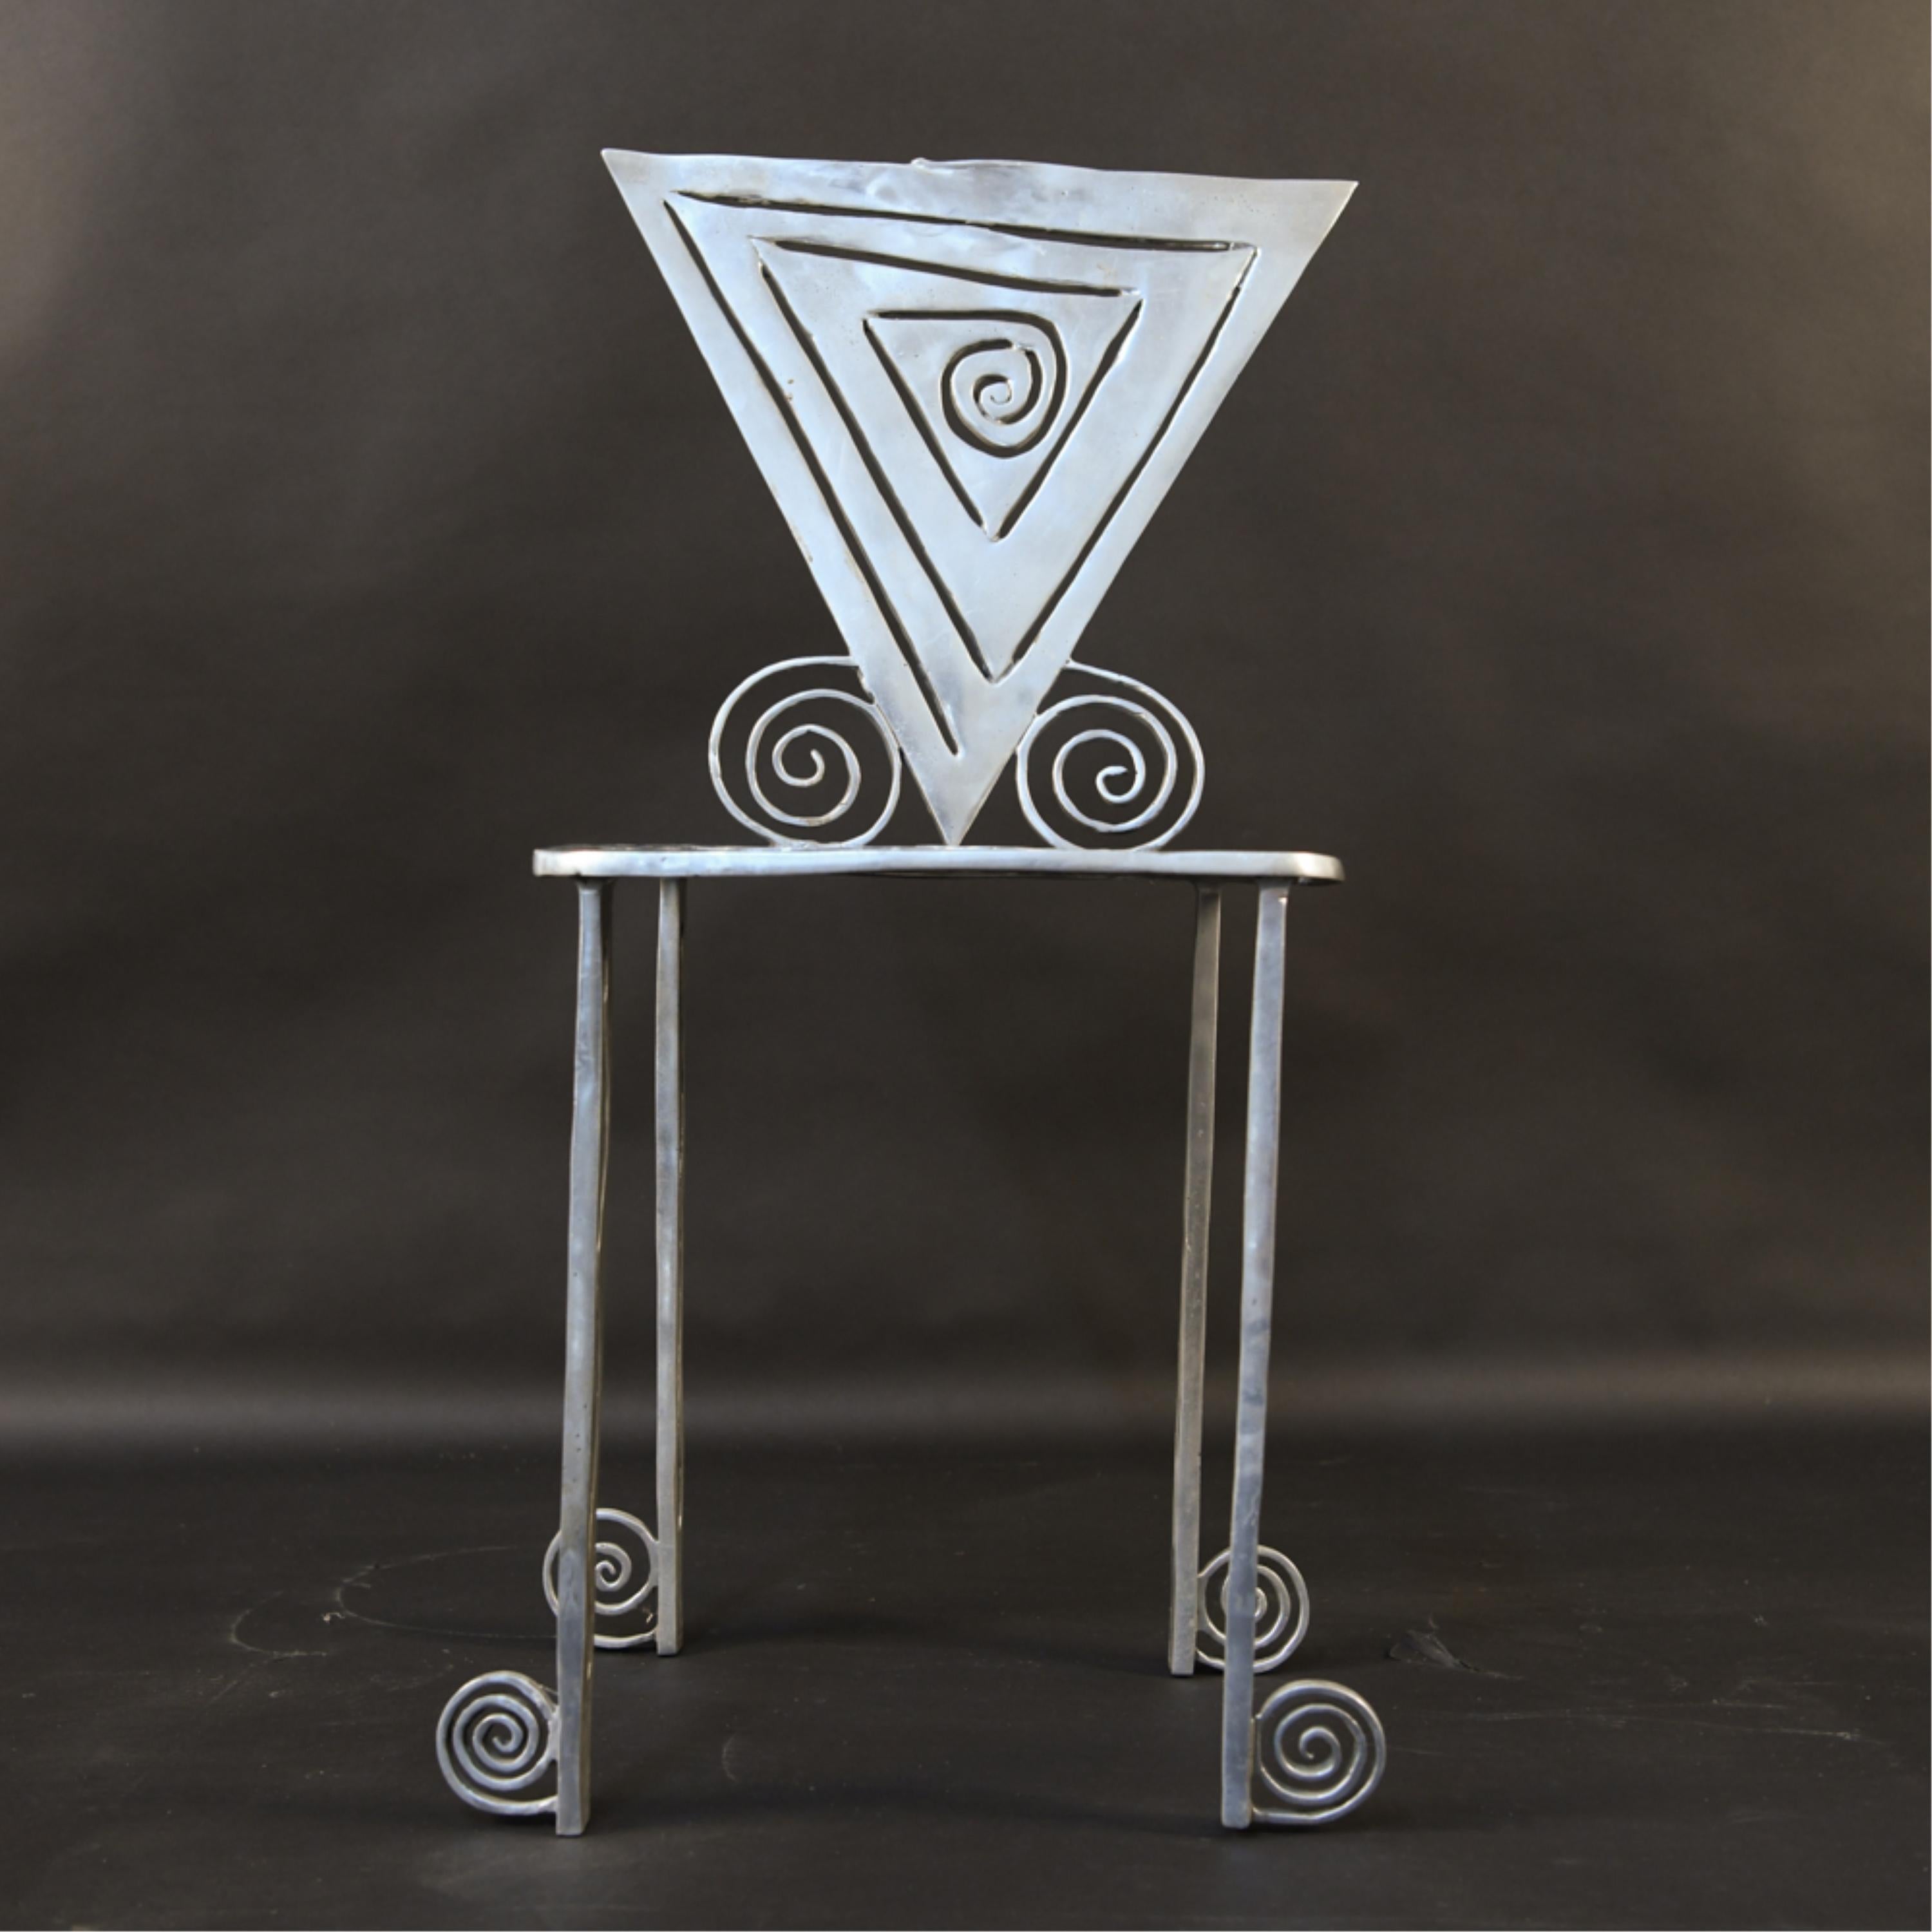 Toby Heller, American (1927-2017).
Spiral design side chair. Cut, welded and polished aluminum, c. 1980's. Apparently unsigned.
Provenance: from the artist's estate.
A woman of seemingly endless artistic talent and inspiration, Toby Heller was a